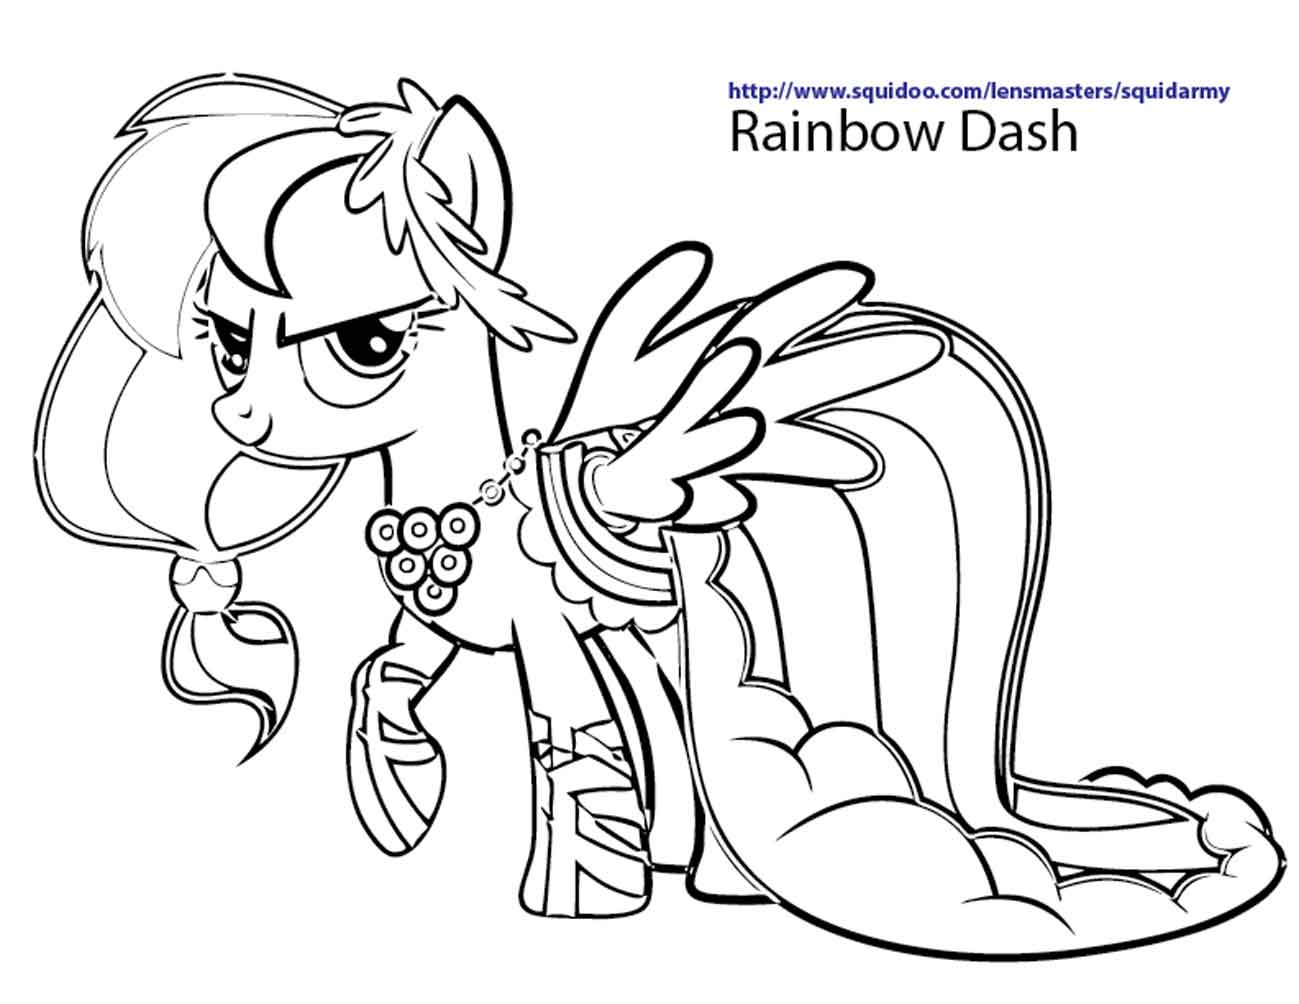 My Little Pony Coloring Pages Rainbow Dash Equestria Girls - Coloring Home